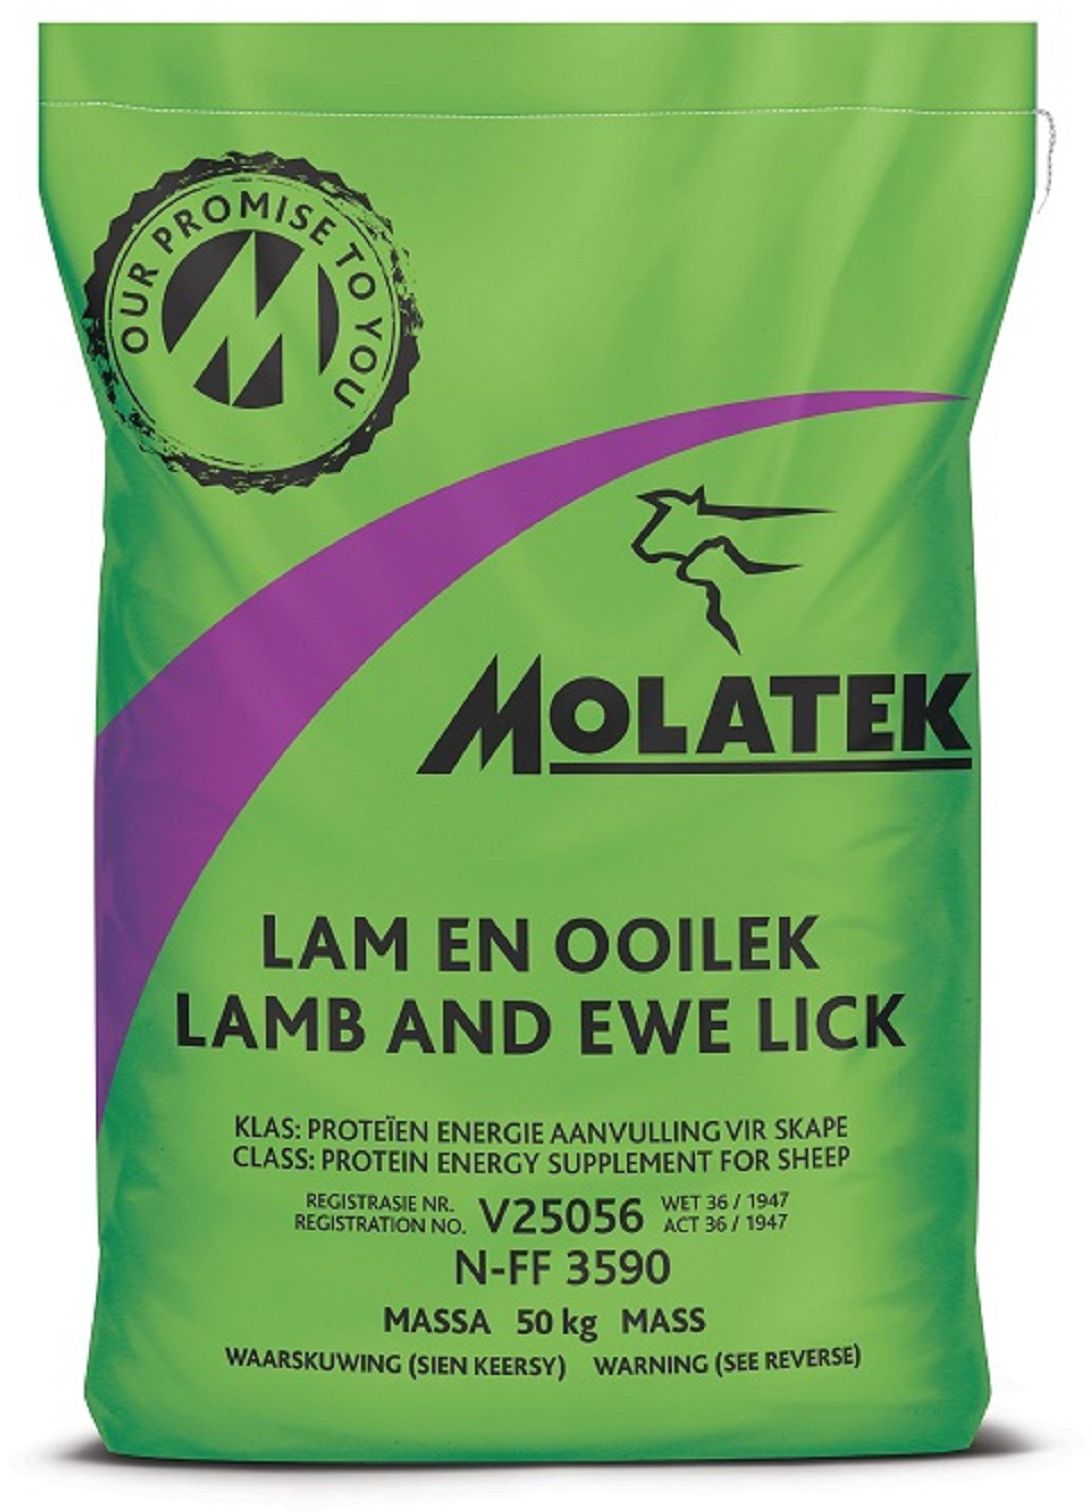 Molatek Lamb and Ewe Lick is a high-quality production lick for sheep and goats that uses high-quality bypass protein to ensure optimum future production potential of the flock. Due to small differences in the nutritional requirements of late-pregnant and early-lactating ewes, only one supplement is needed at different intake level. Decreases pregnancy disease and the incidence of abortions. Enhances fetus and udder development in late pregnancy. Normal onset of lactation with enough colostrum for twin lambs. Supply as a production supplement for young ewes and rams after weaning to improve growth. Optimal development of lamb's reproduction potential. Sufficient wool follicle development in lambs for a lifetime of optimal wool production.